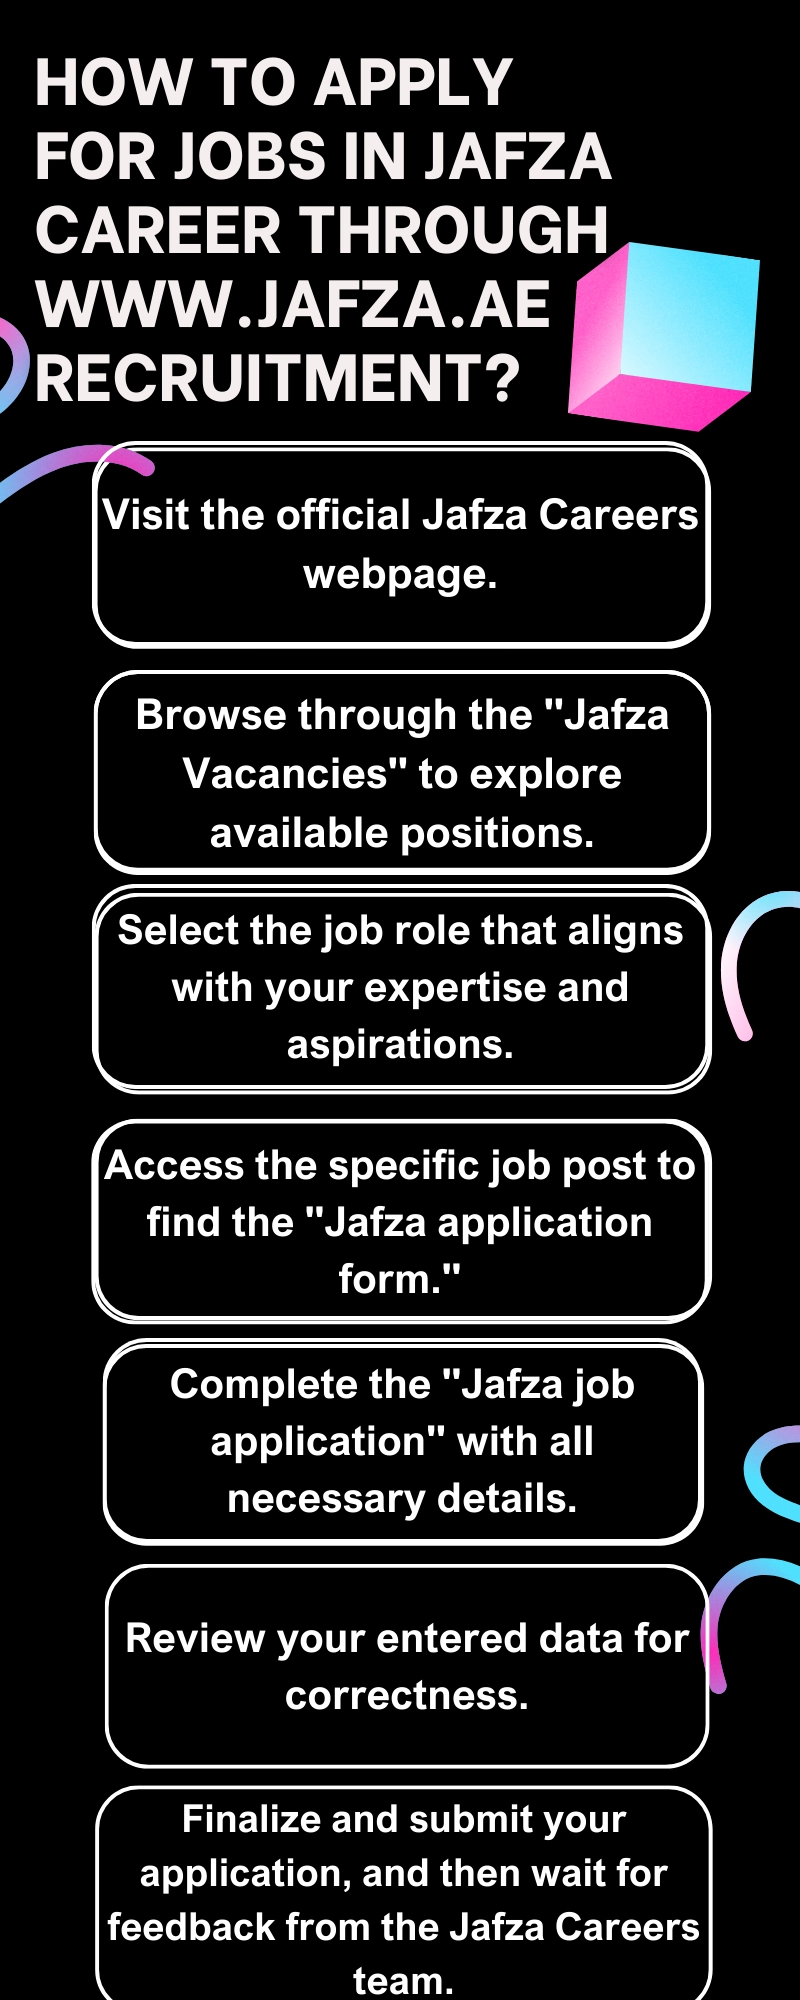 How to Apply for Jobs in Jafza Career through www.jafza.ae recruitment?